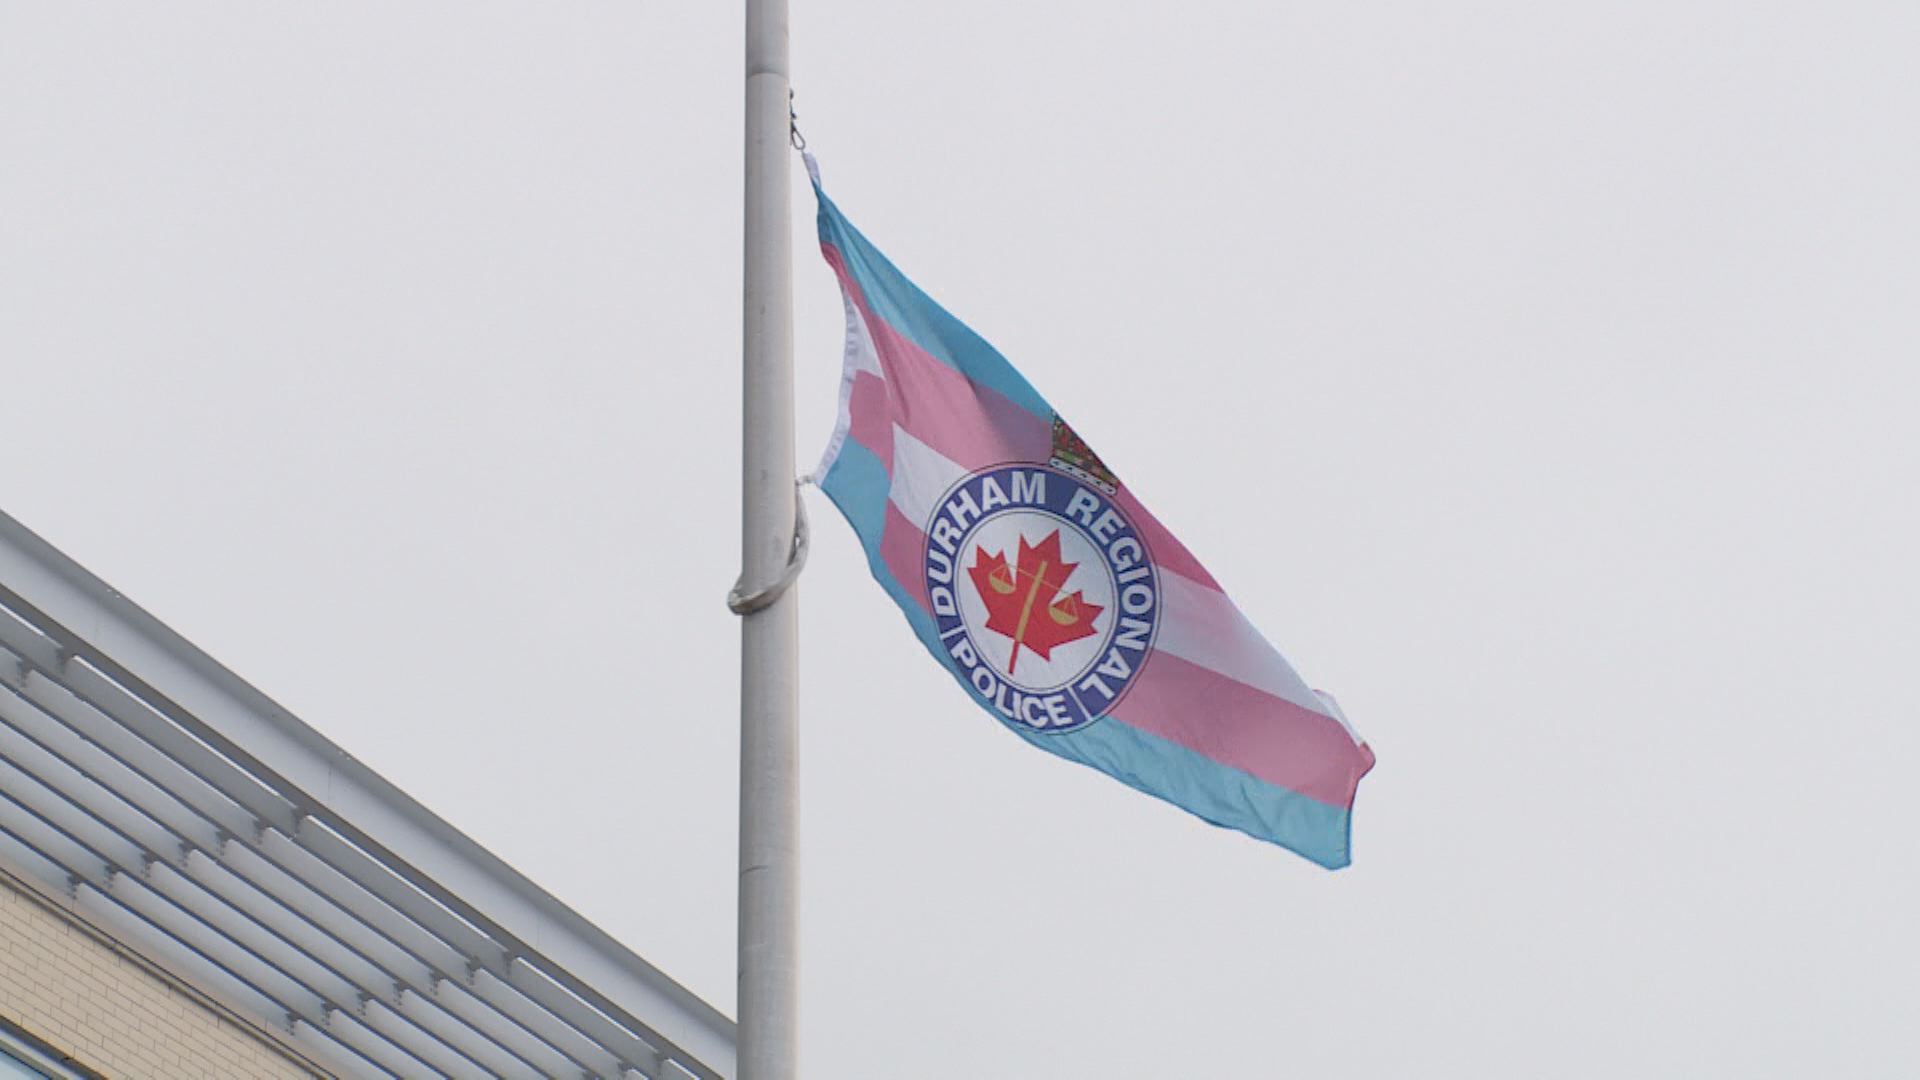 Rising incidents of violence in focus during Kelowna’s Transgender Day of Remembrance